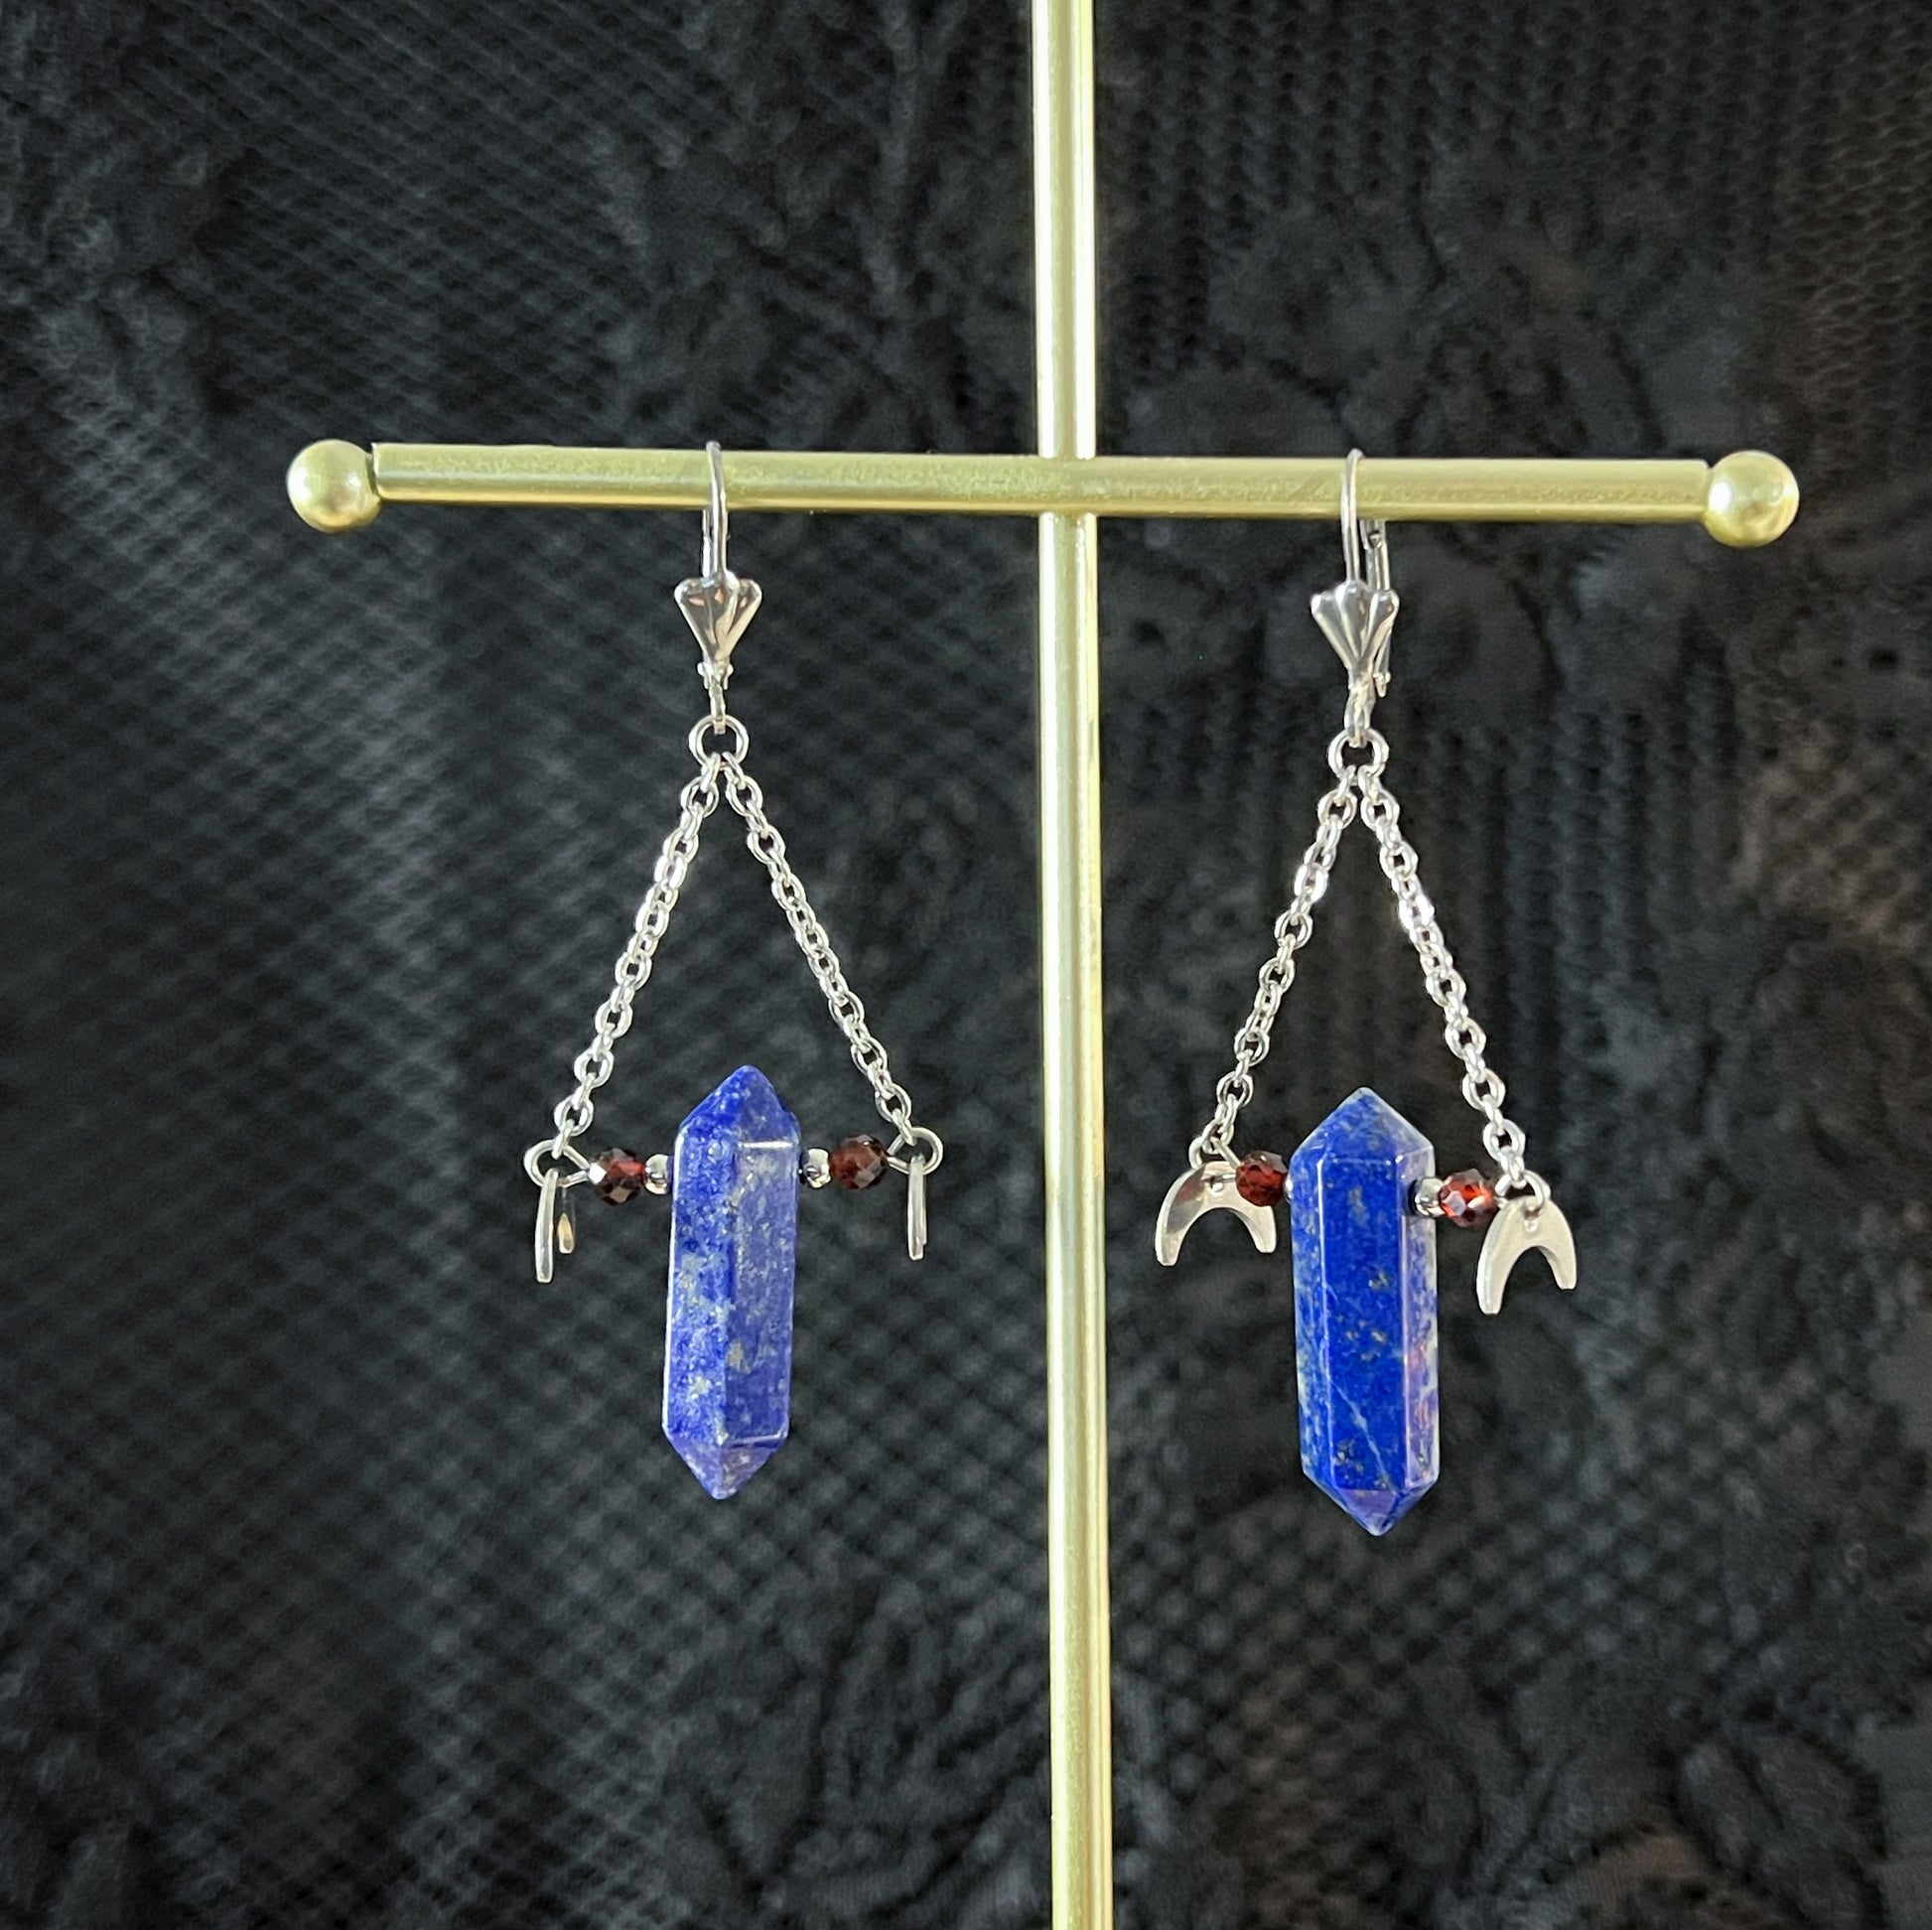 Lapis lazuli garnet and stainless steel gemstone earrings with Moon crescent spiritual jewelry statement earrings